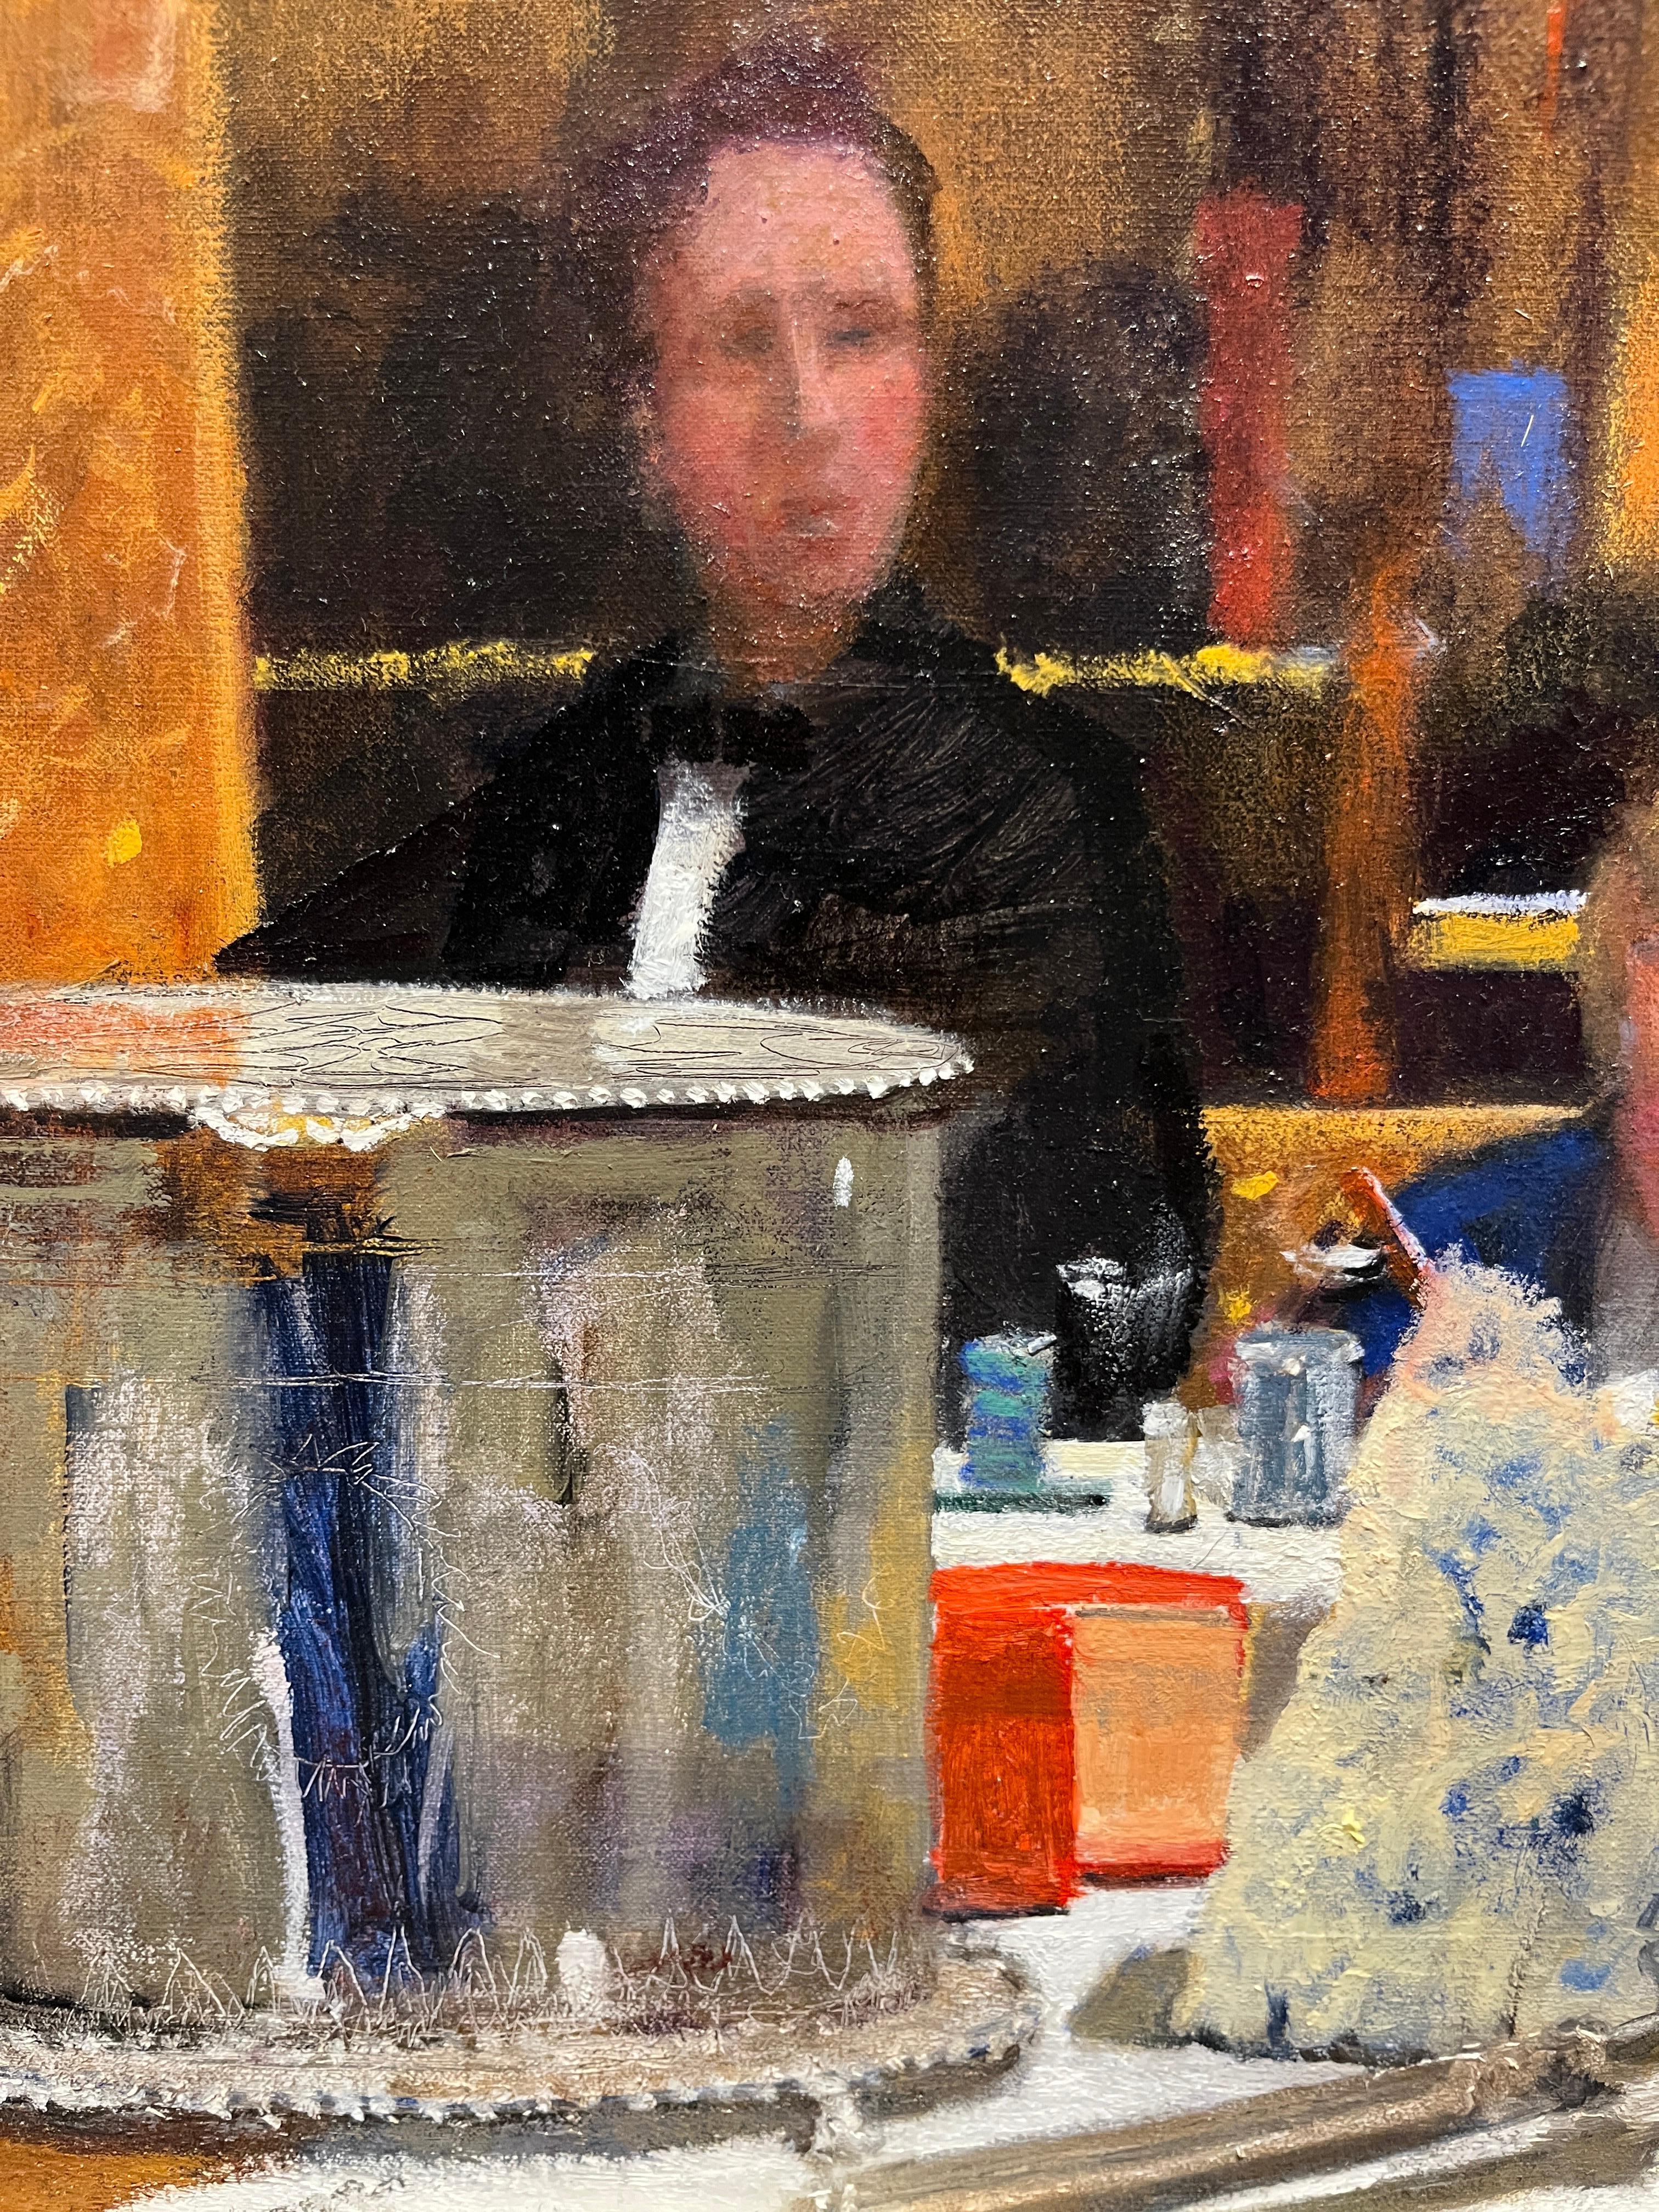 Cafe Society - Painting by Donald Jurney